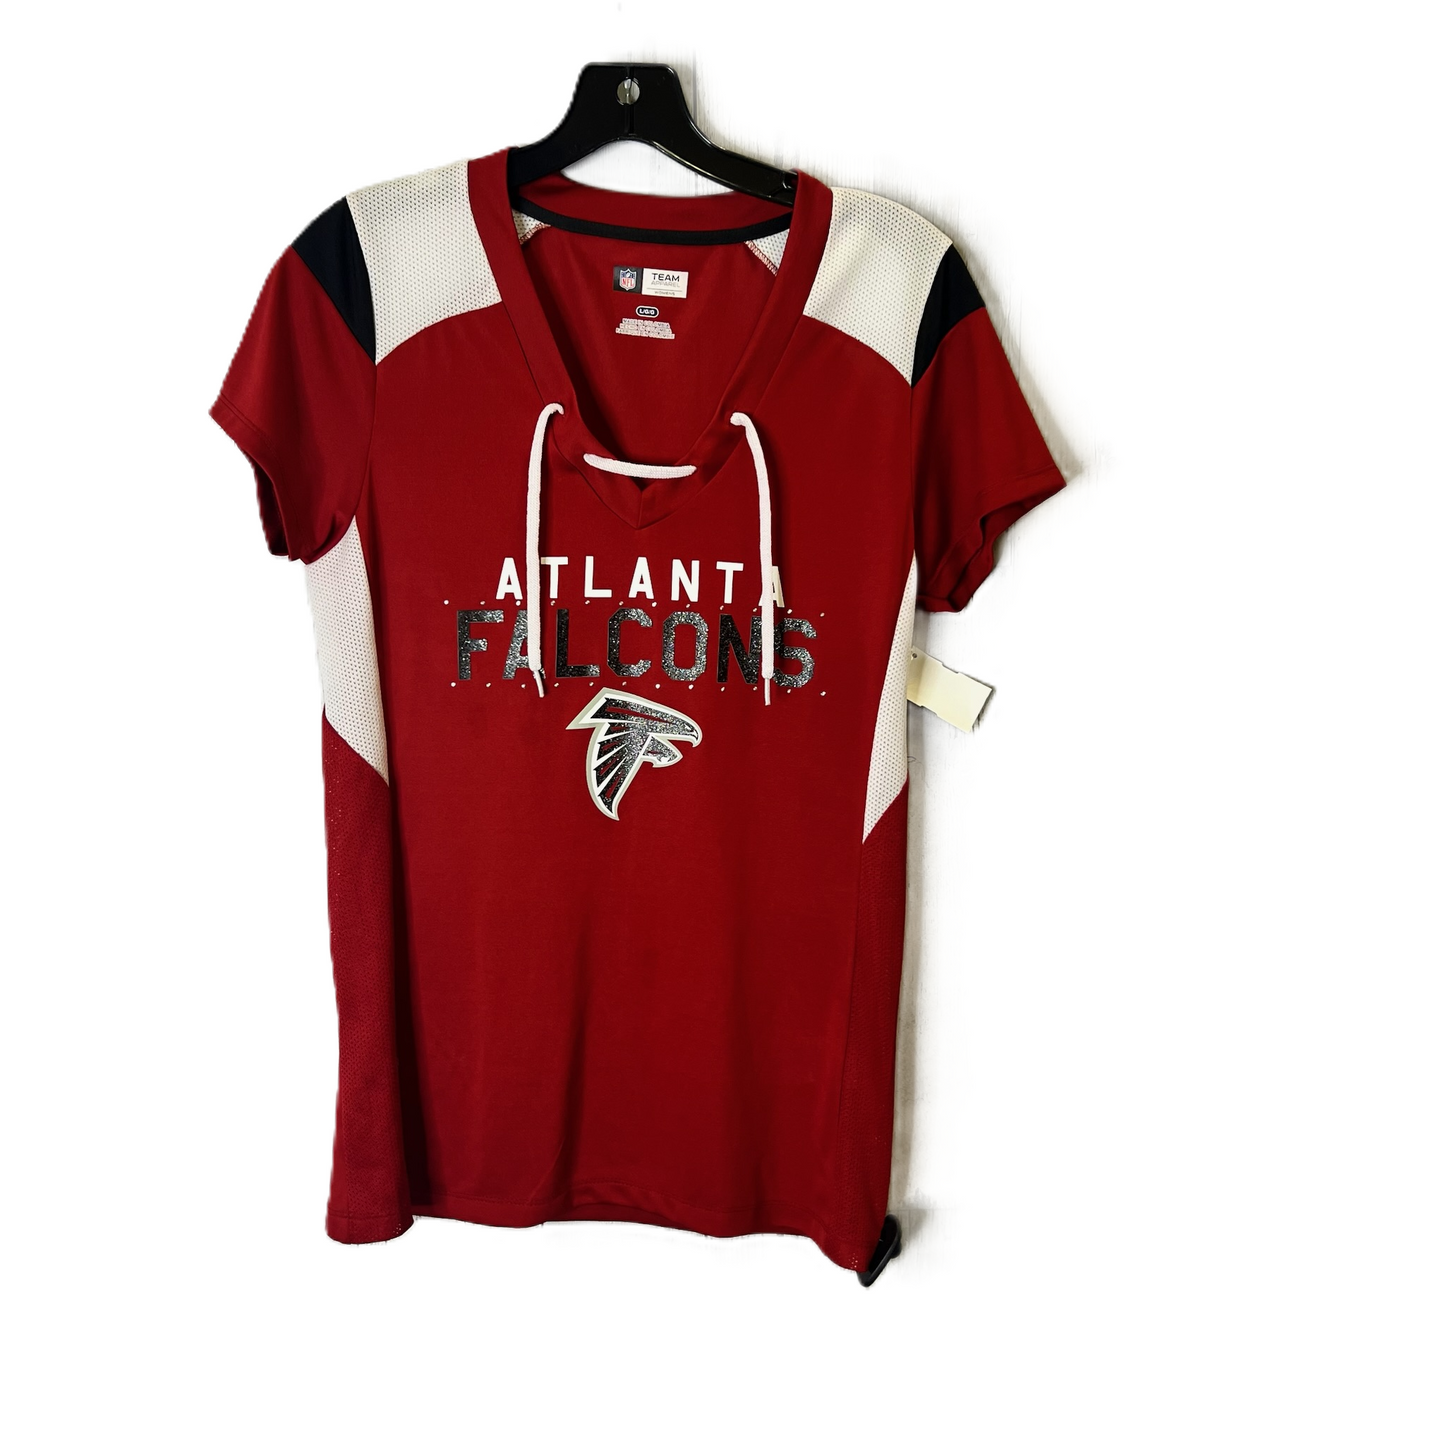 Red Top Short Sleeve By Nfl, Size: L